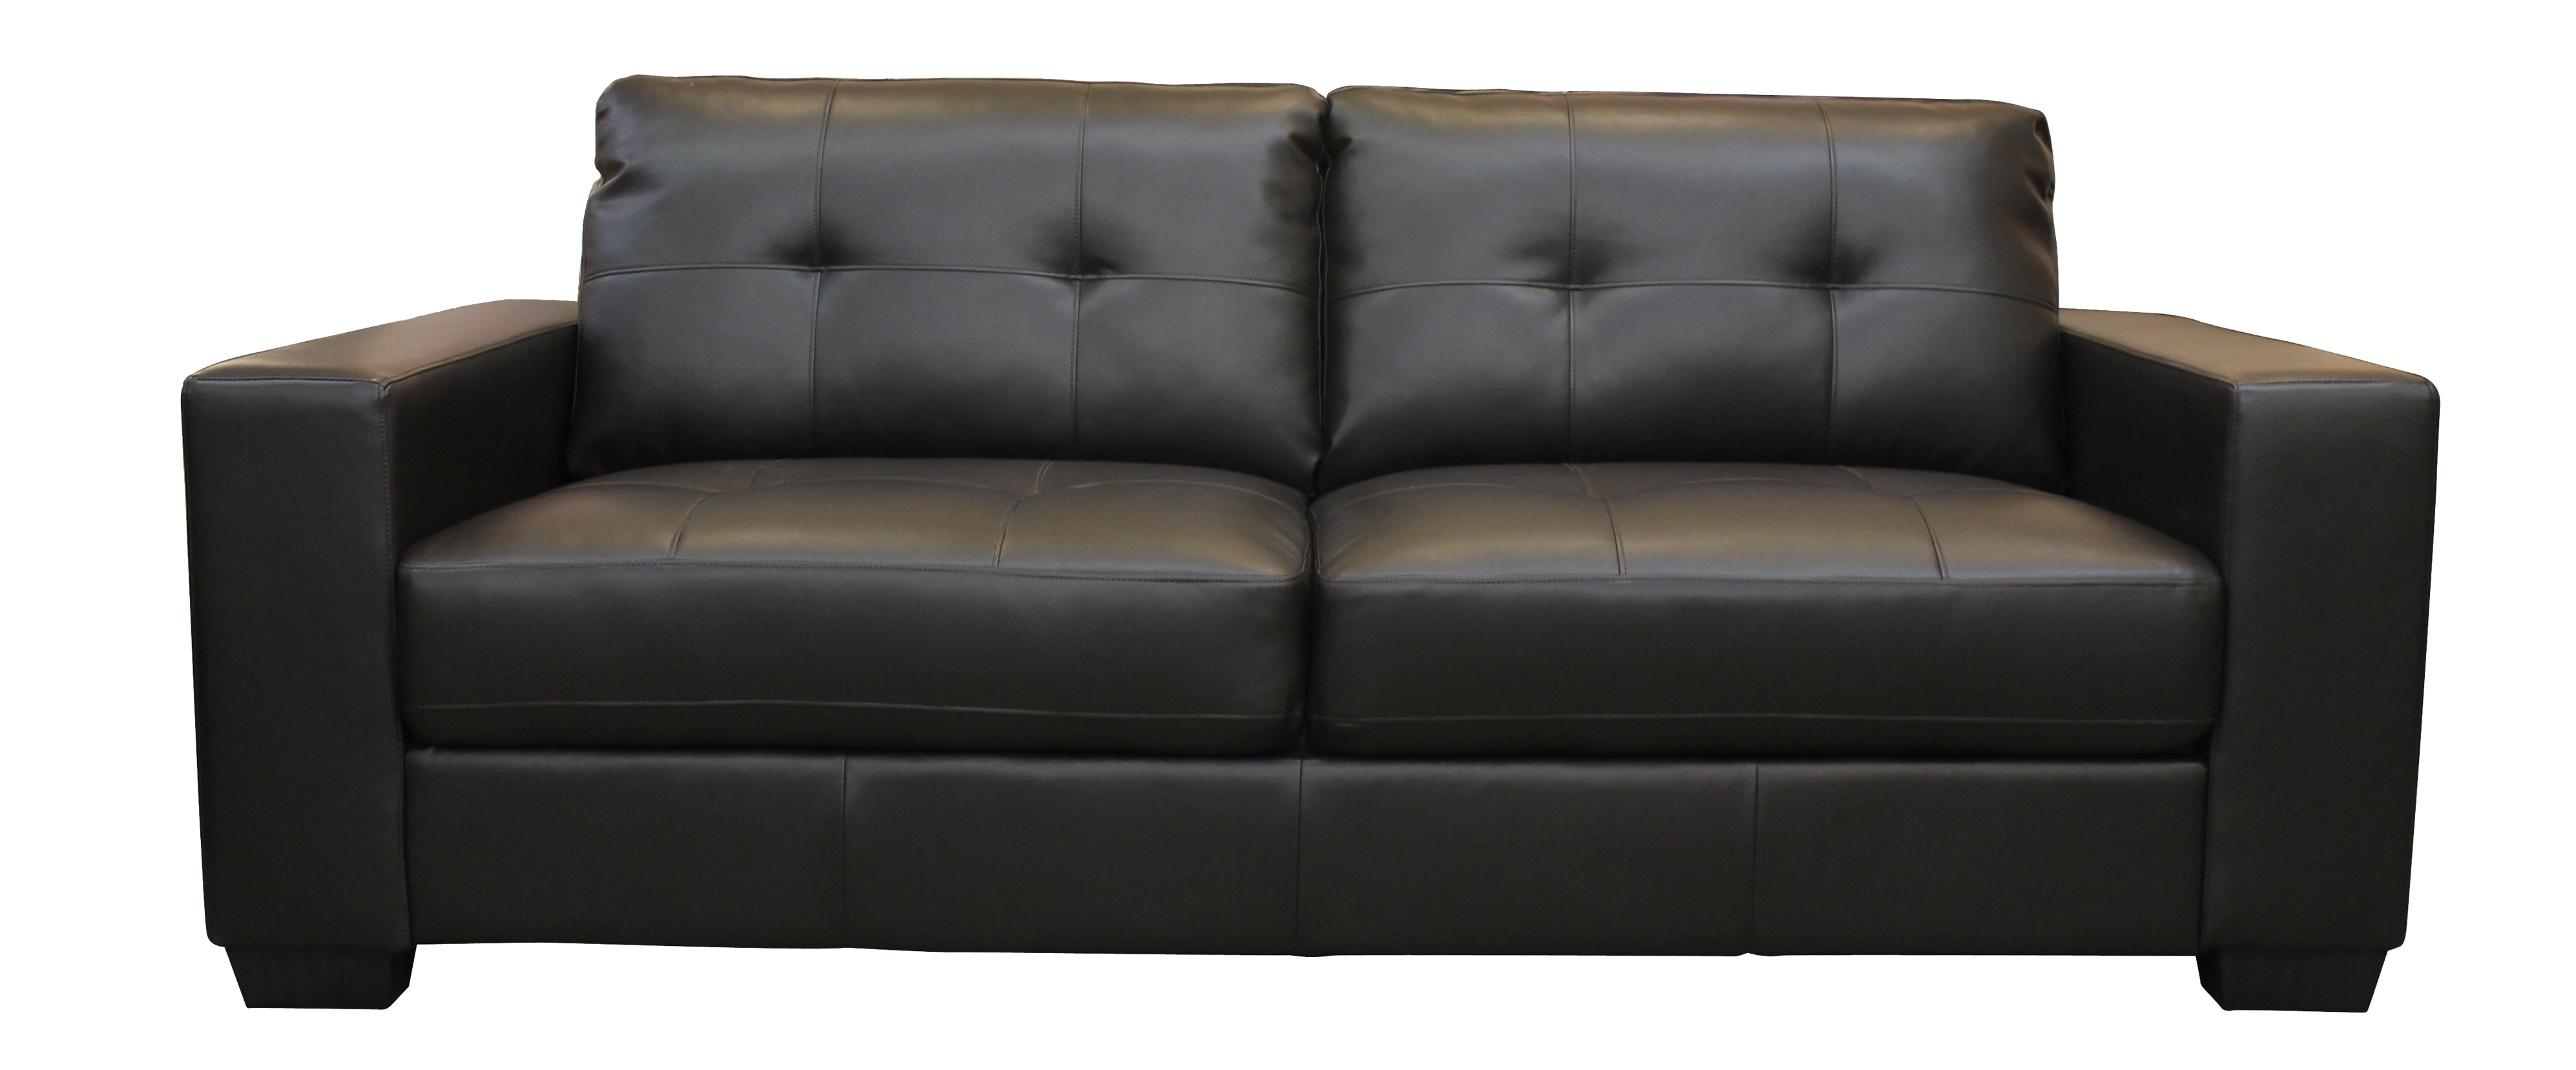 Couch PNG, Sofa PNG HD Image pngteam.com